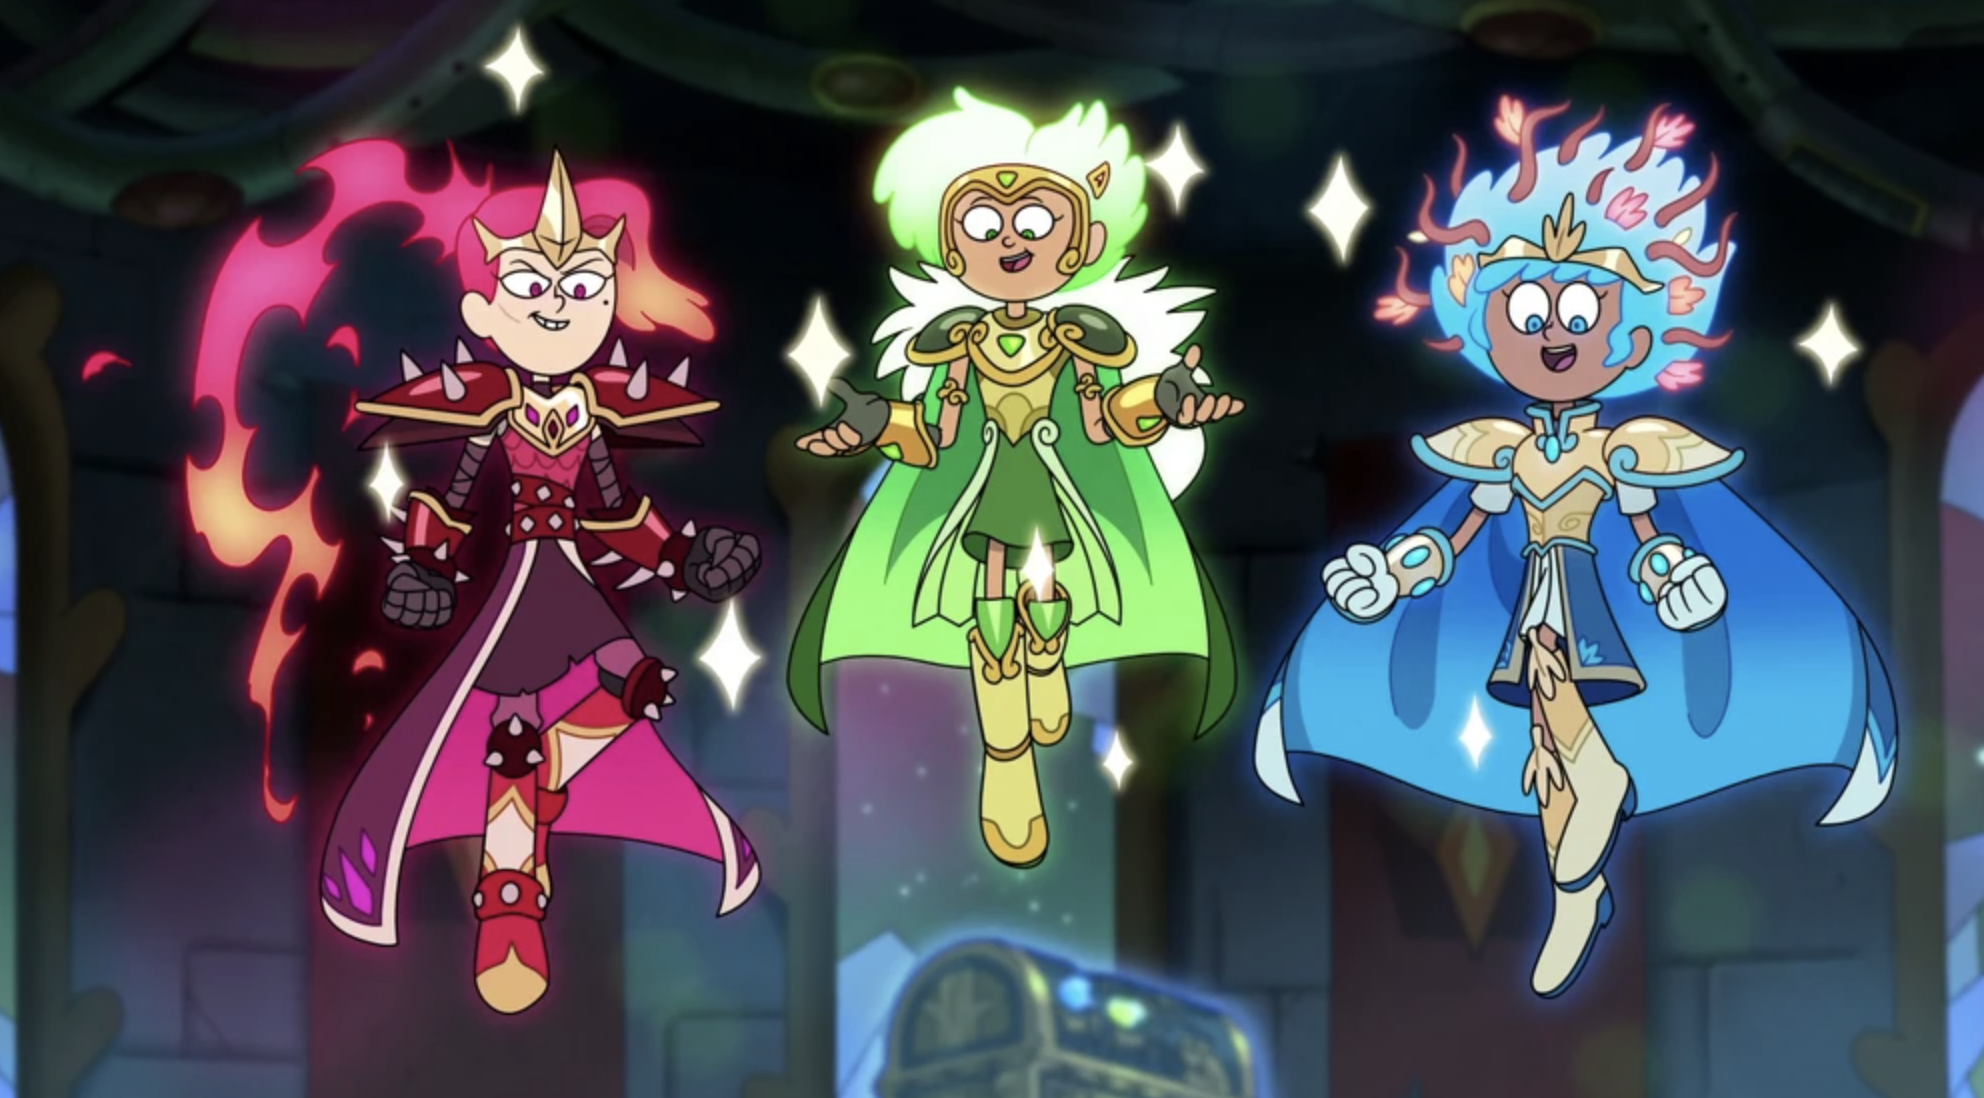 Sasha, Marcy, and Anne all receive their full powers from the Calamity Box. They float in the air, wearing anime inspired armor, and glow pink, green, and blue. 